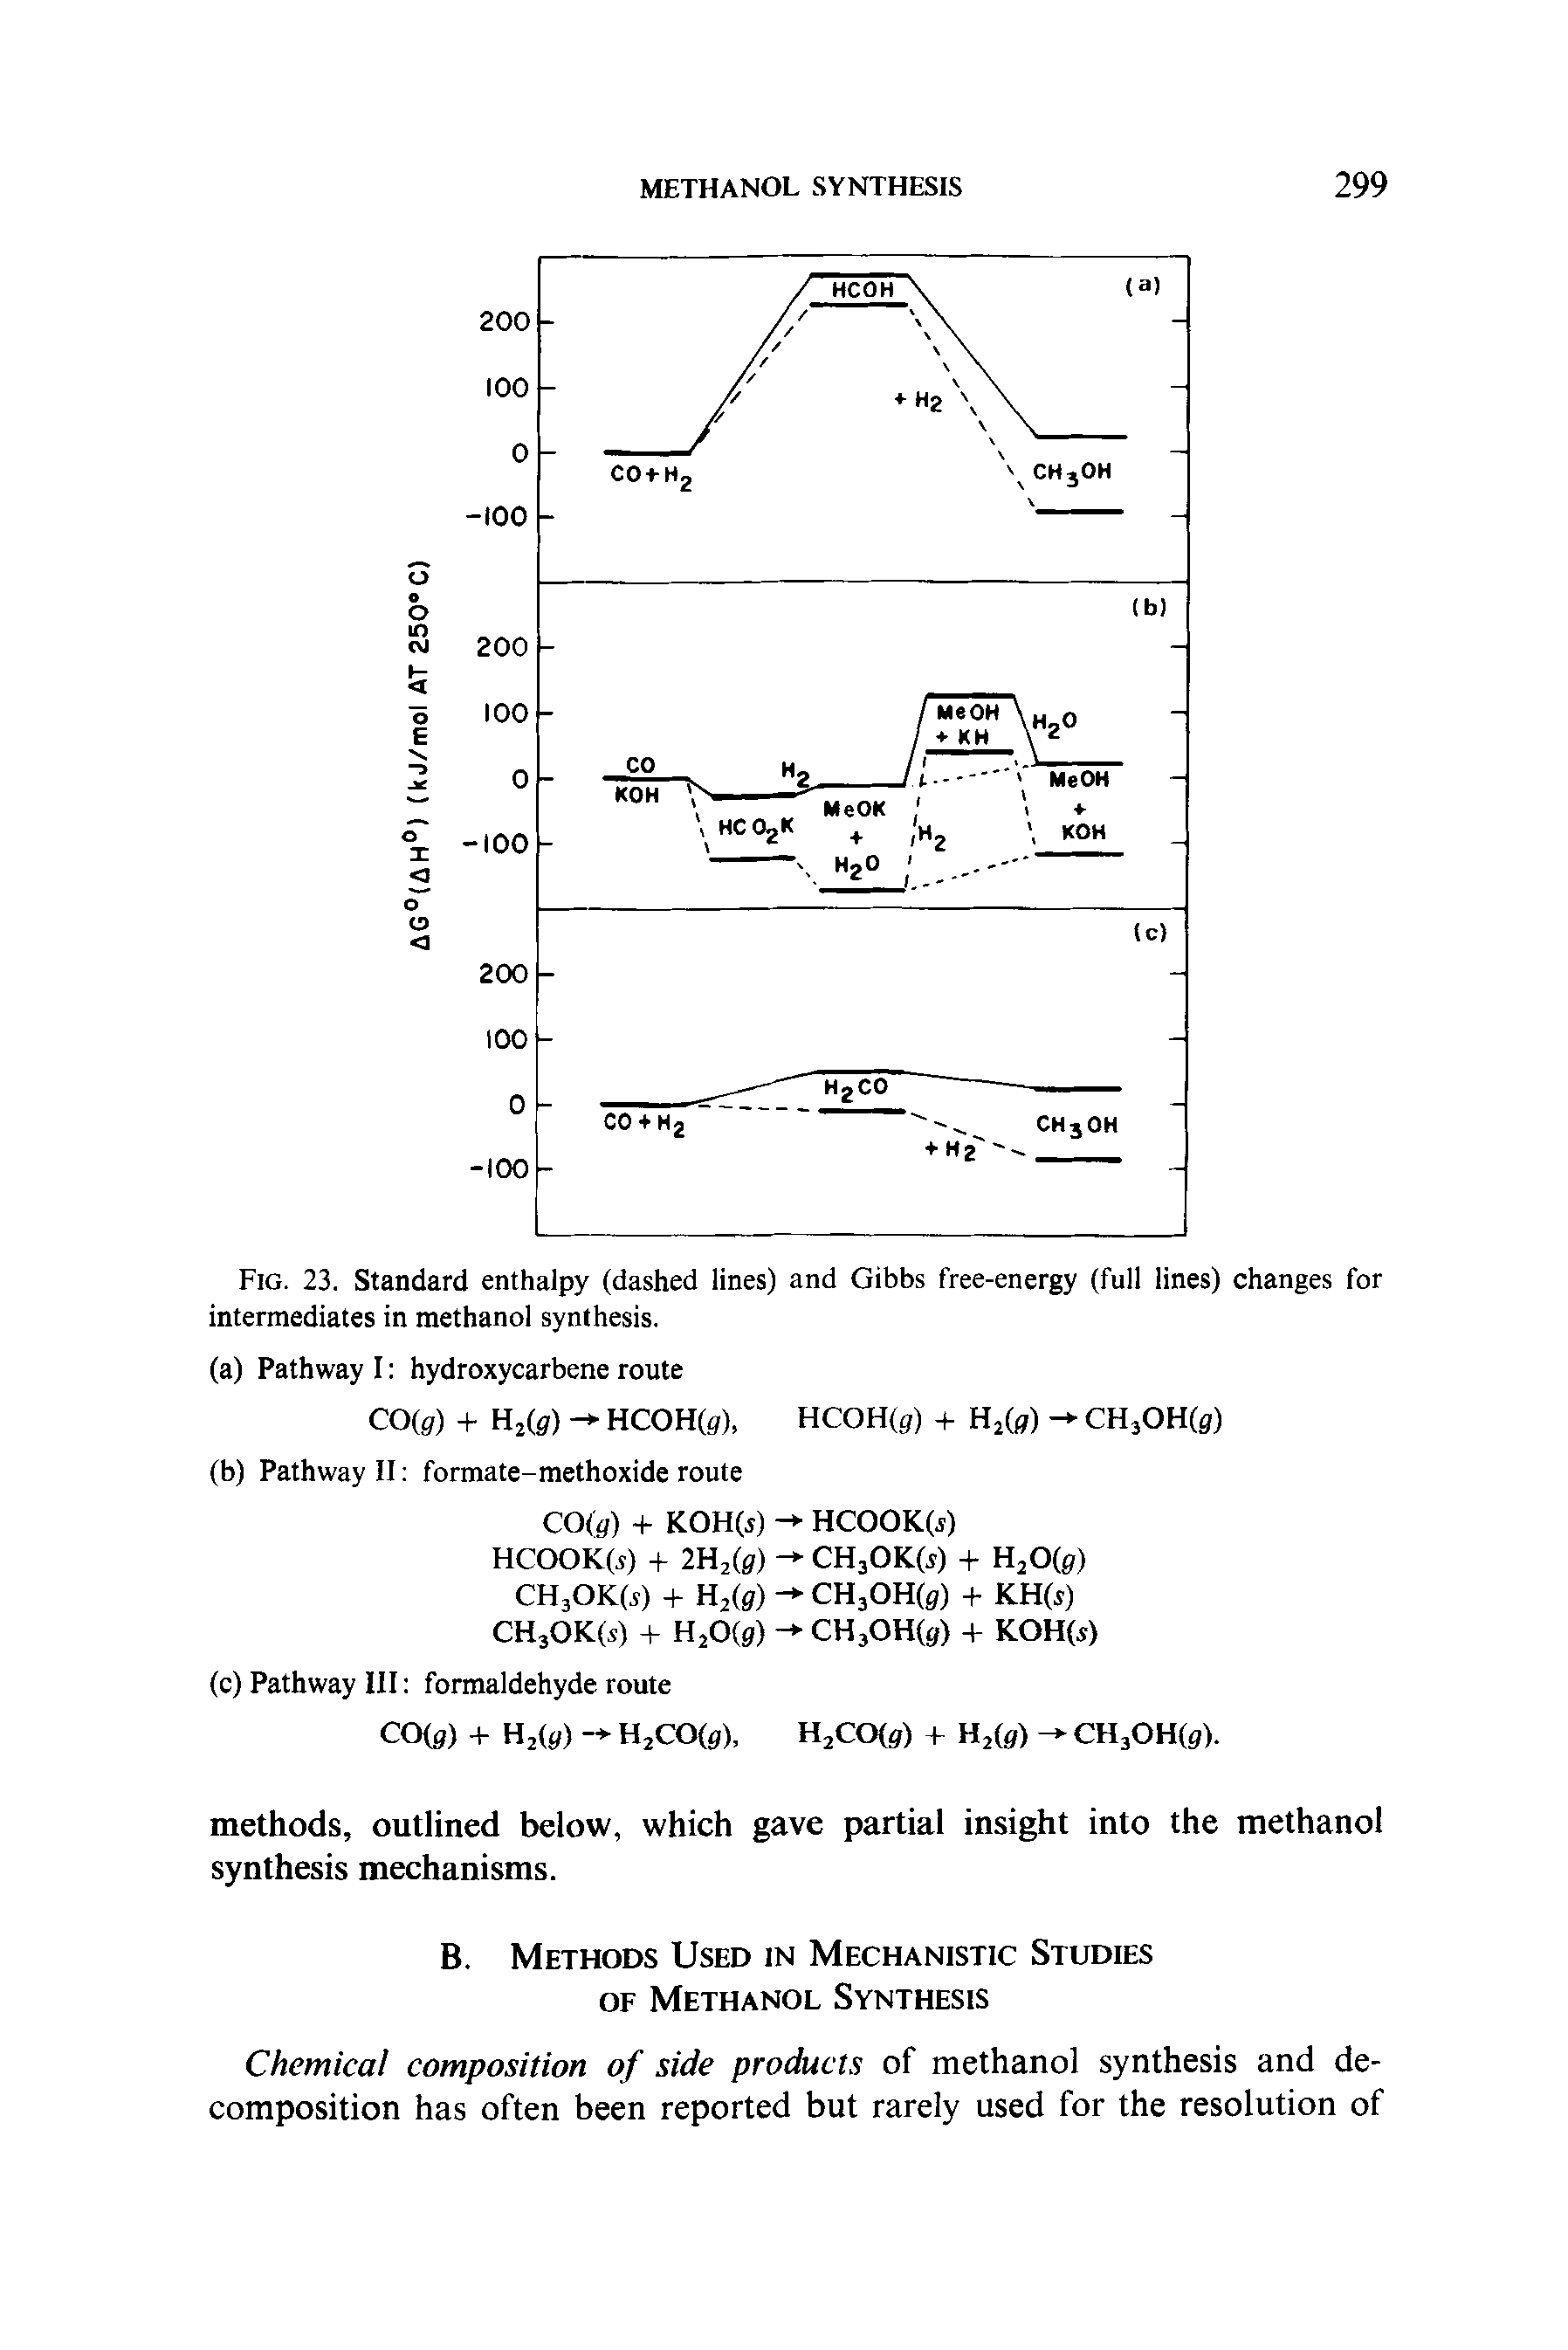 Fig. 23. Standard enthalpy (dashed lines) and Gibbs free-energy (full lines) changes for intermediates in methanol synthesis.